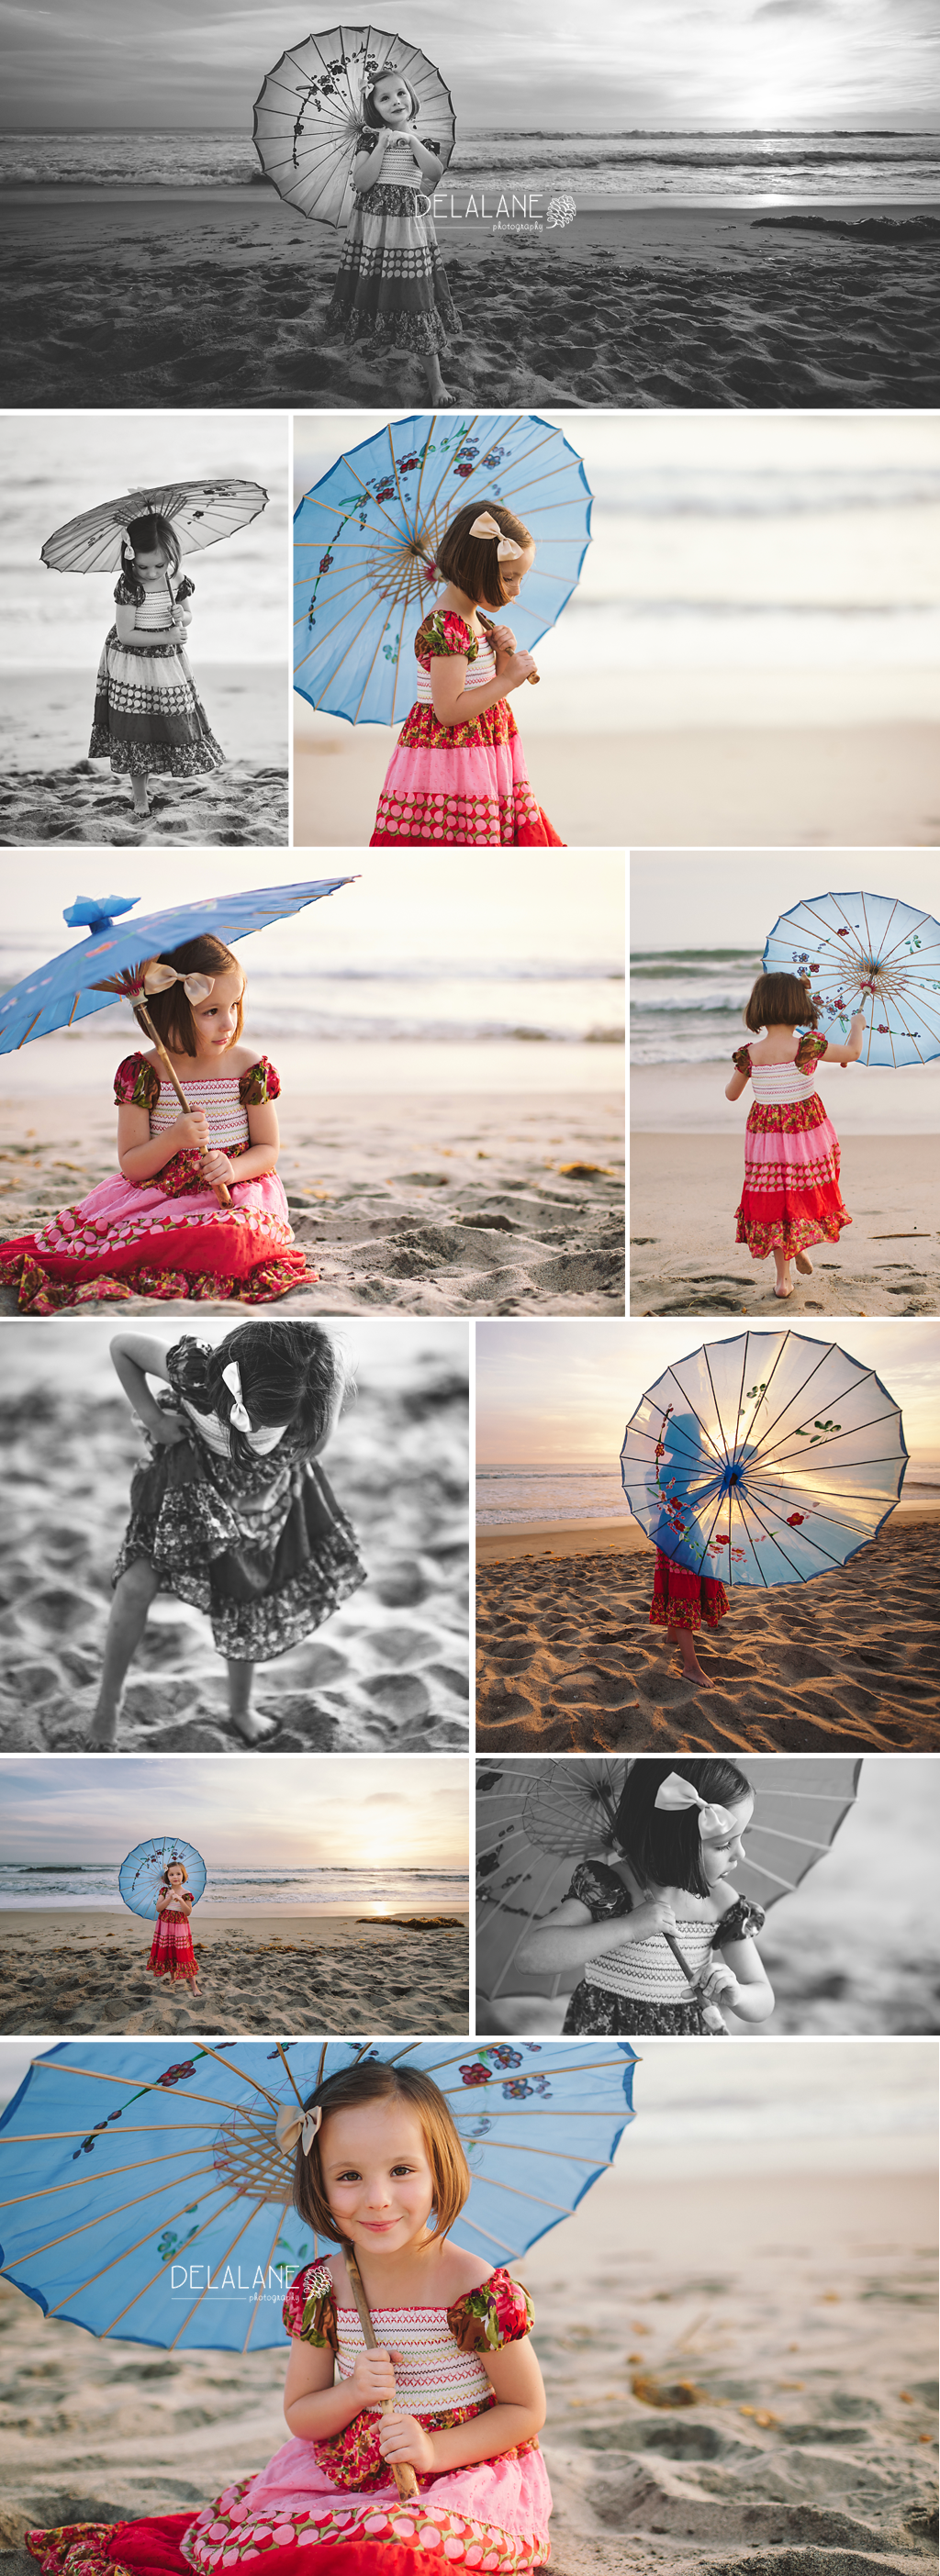 Girl with Umbrella at the Beach